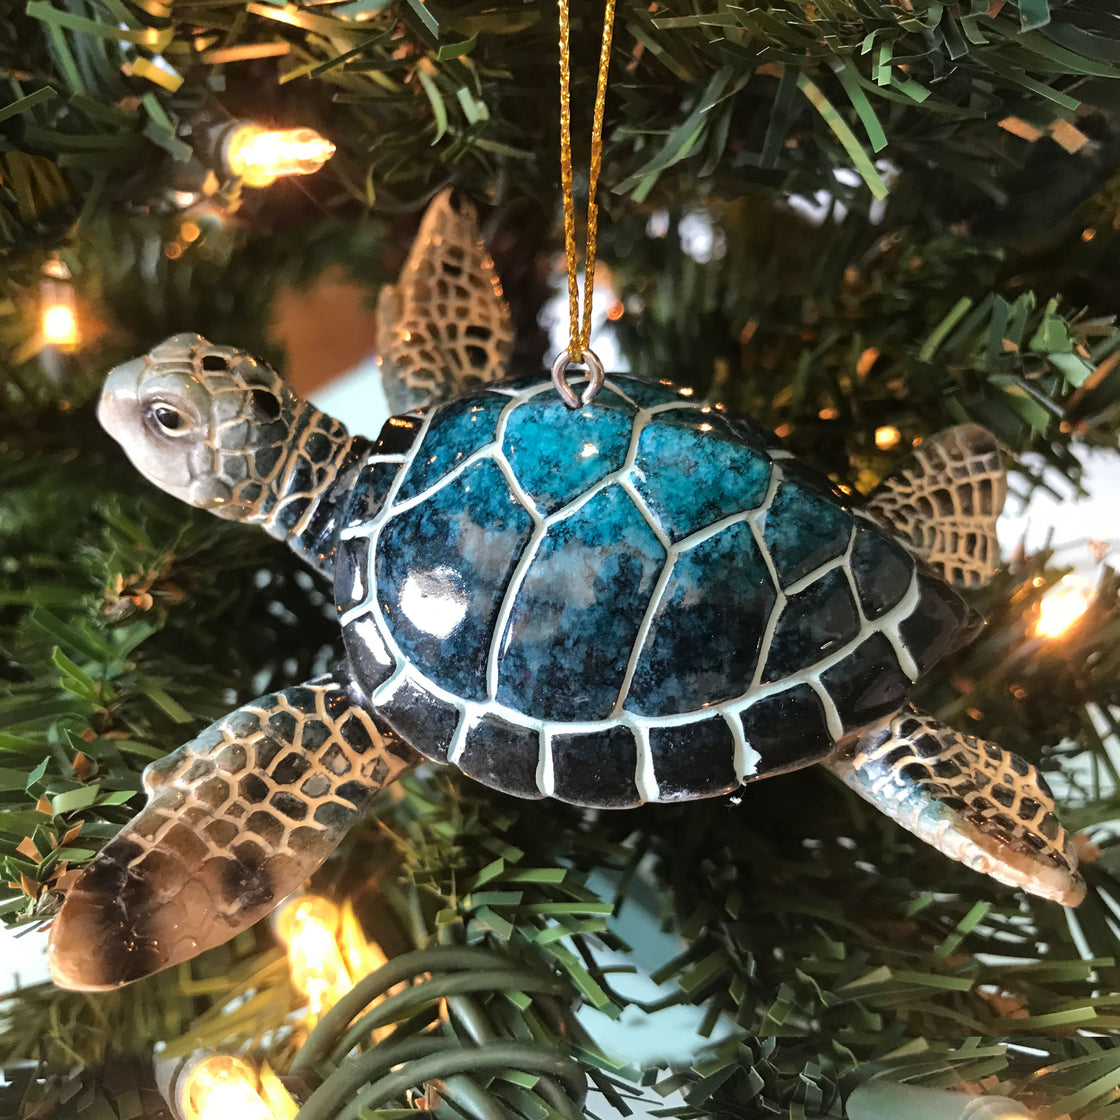 adorable hand-painted blue sea turtle ceramic ornament hanging on Christmas tree